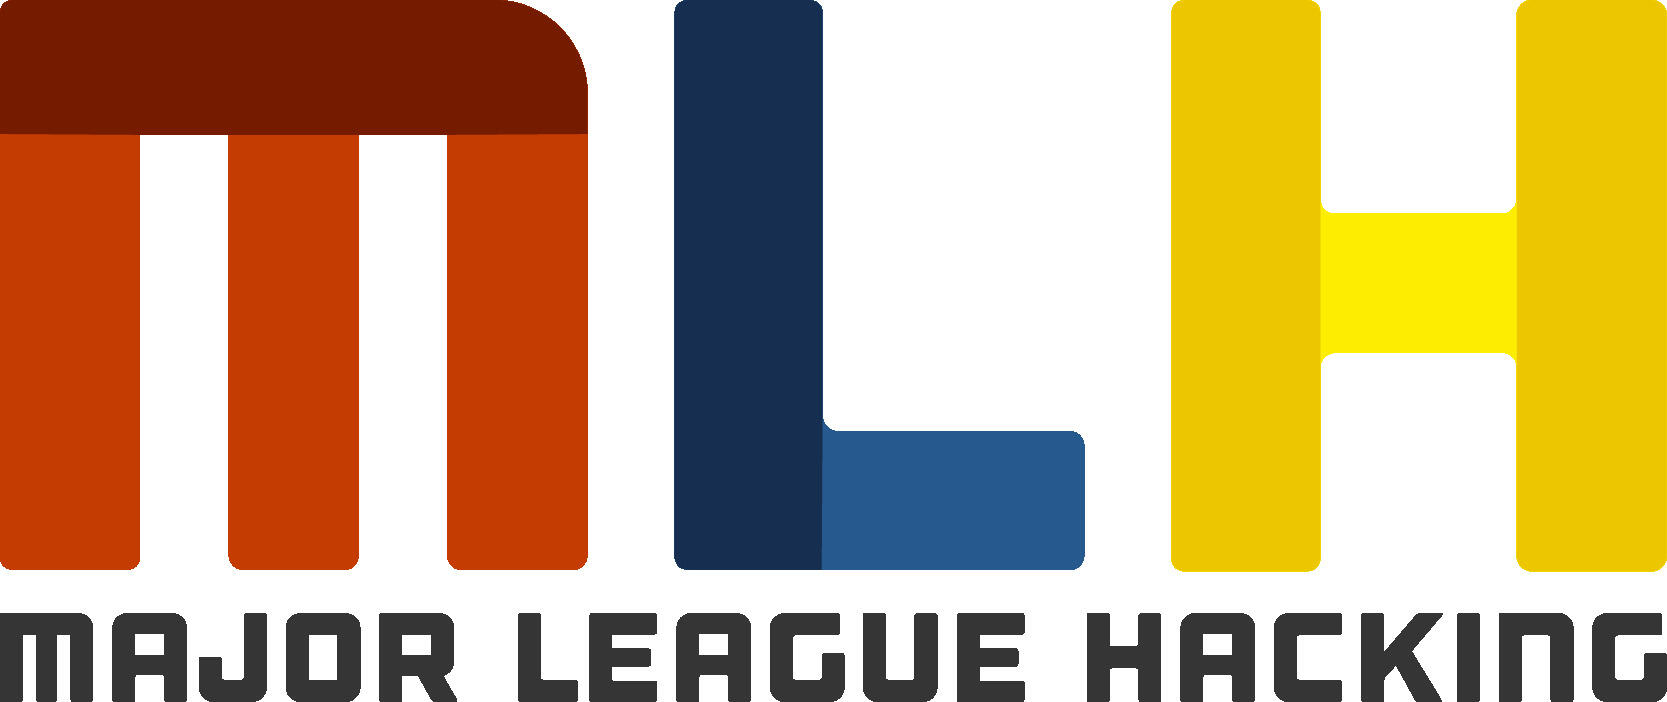 Logo with red M, blue L and yellow H reading "major league hacking" underneath.